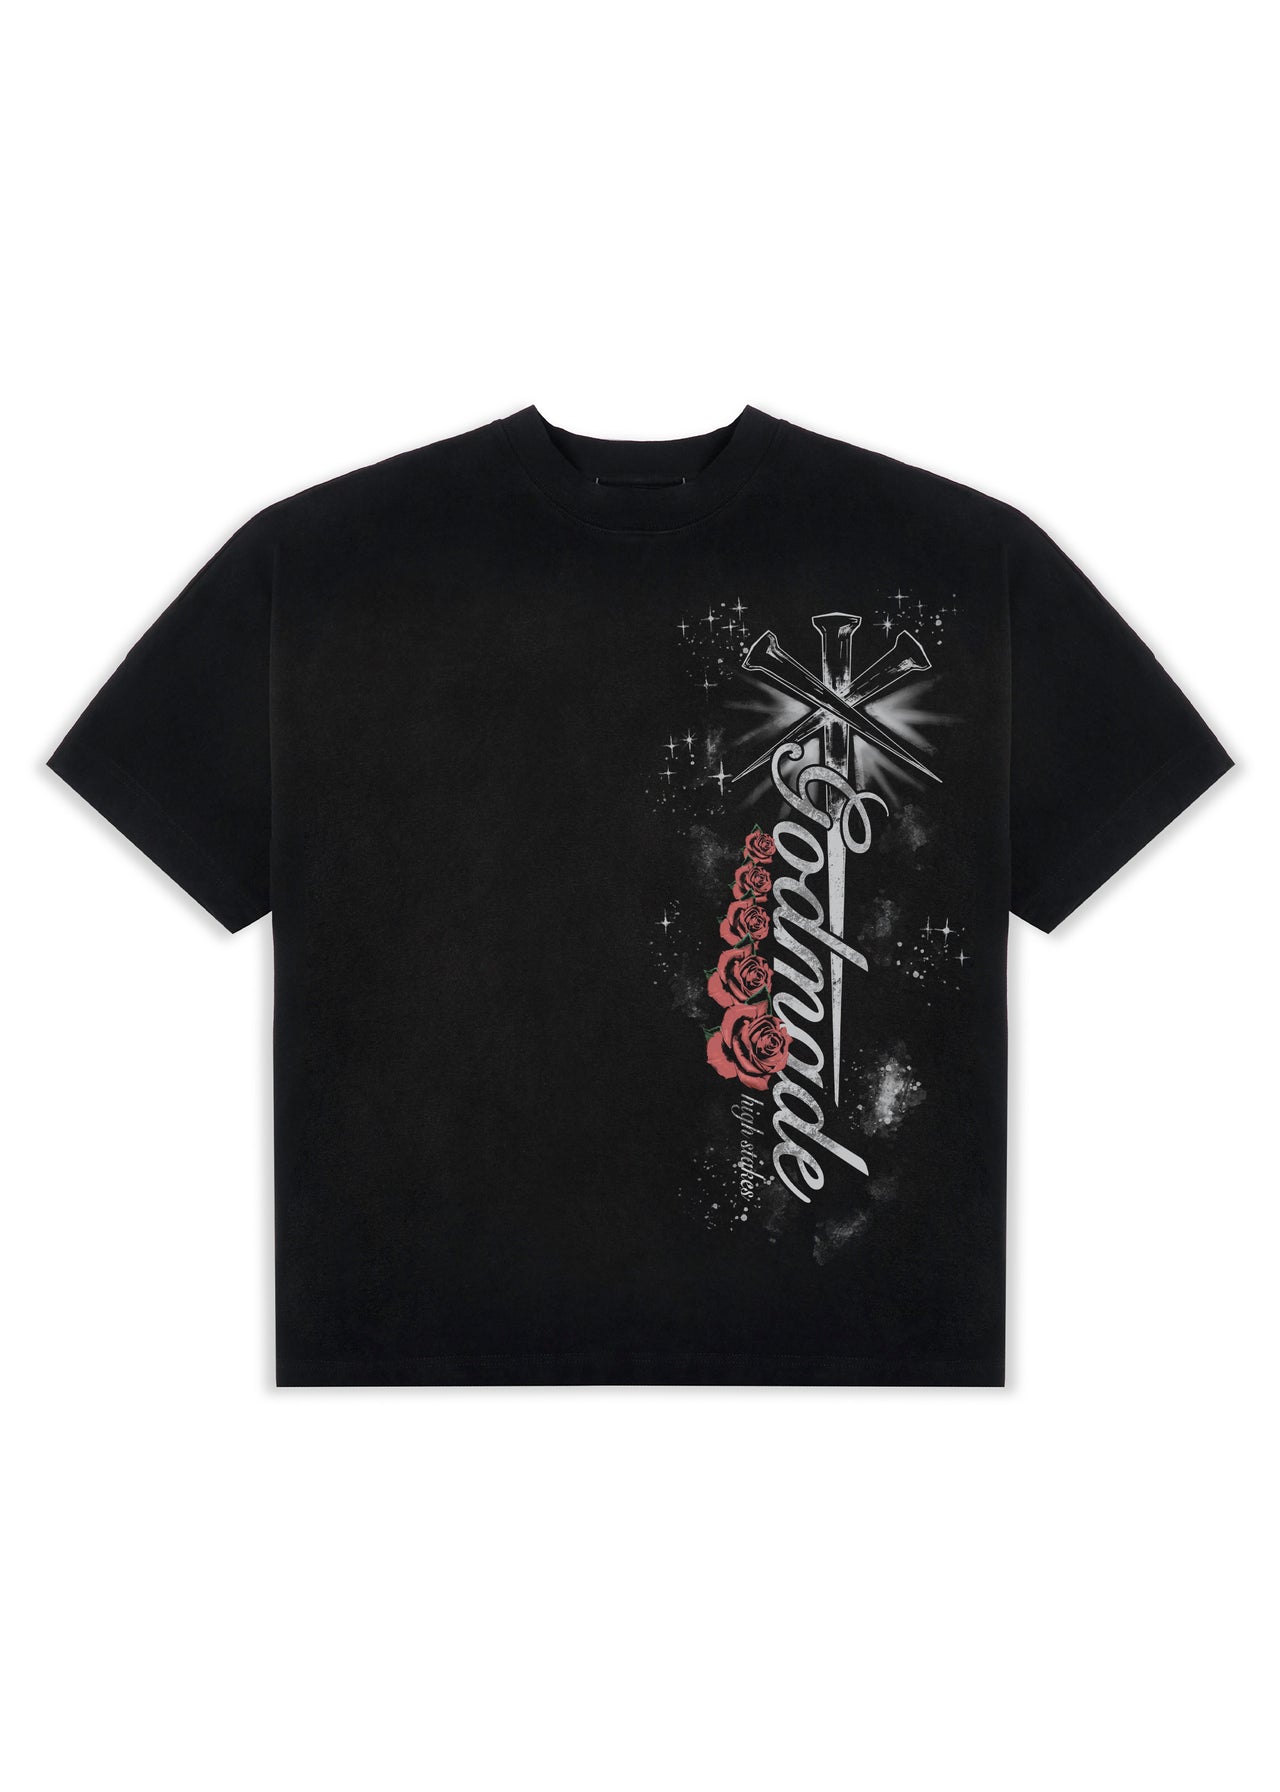 HIGH STAKES - WASHED BLACK T-SHIRT